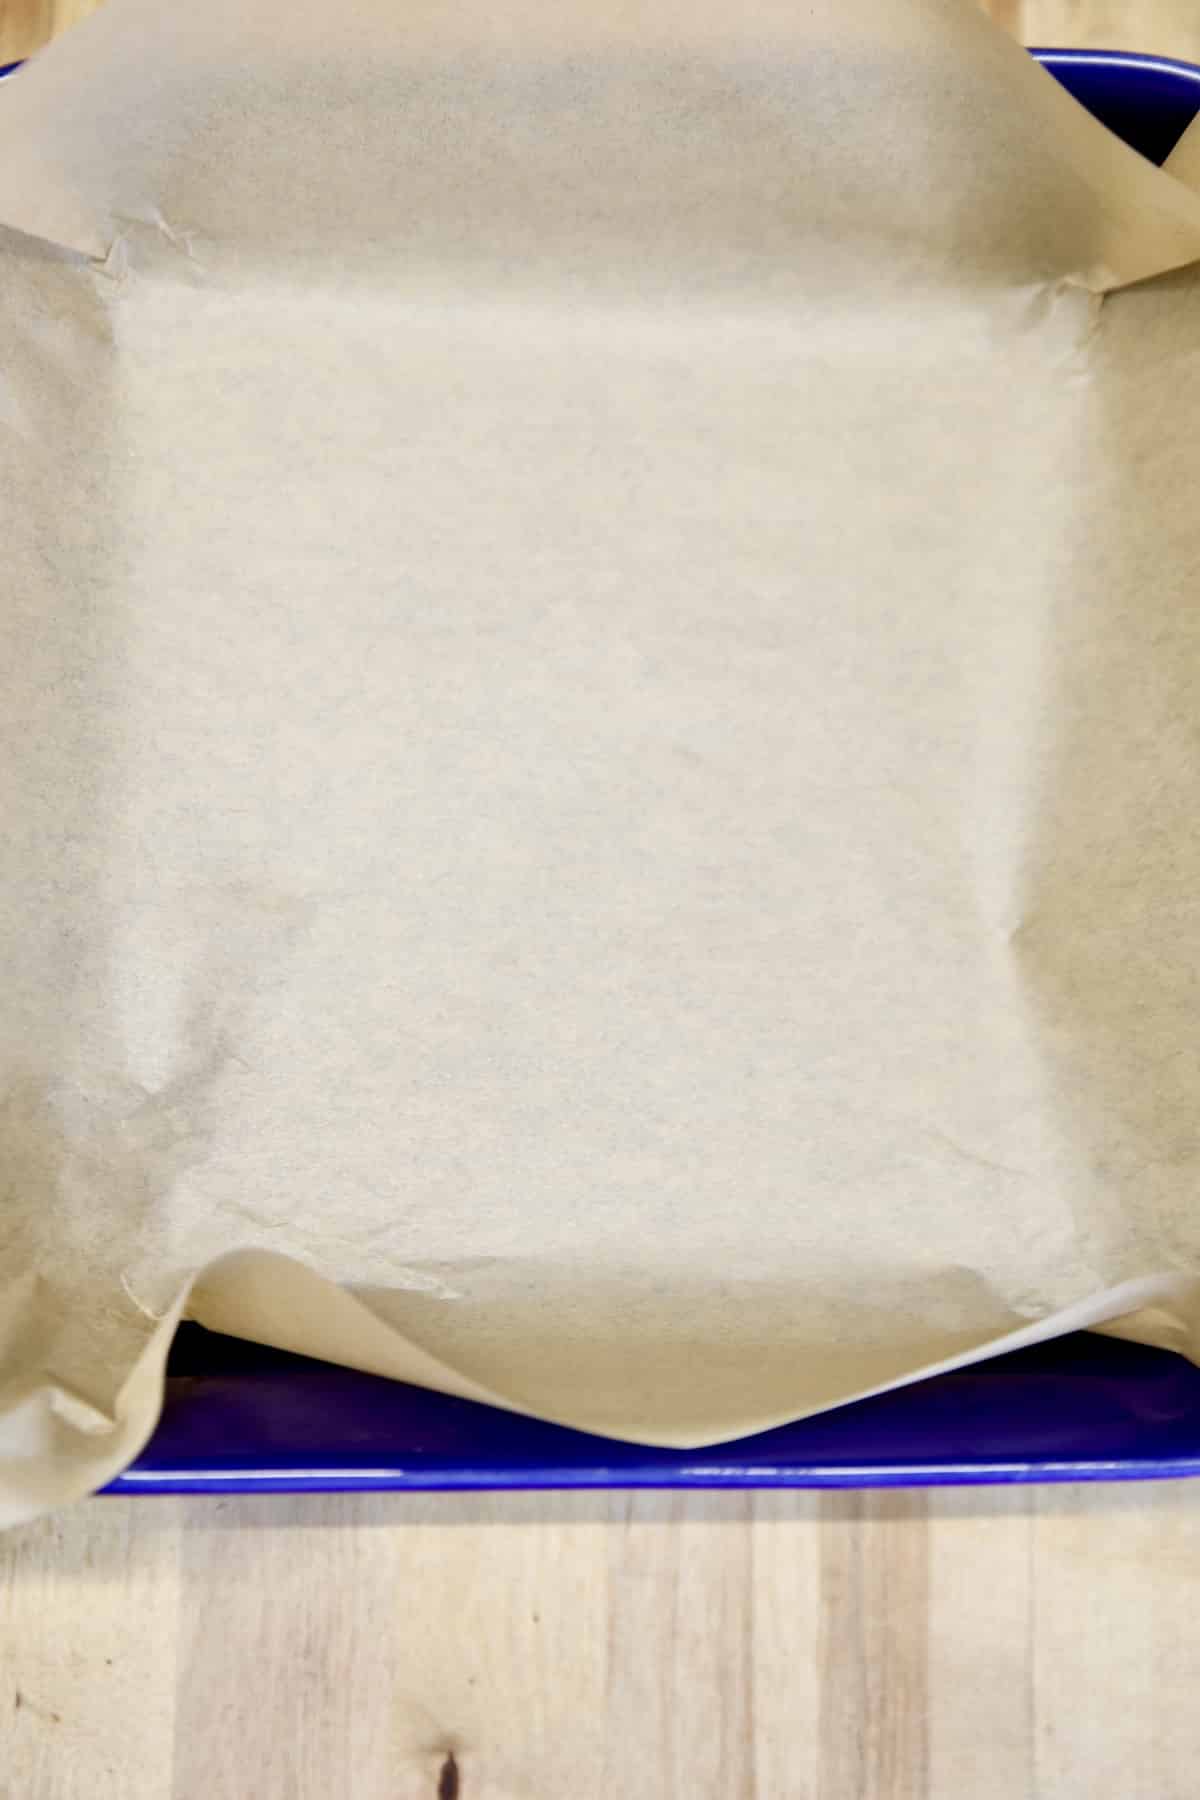 Square pan lined with parchment paper.